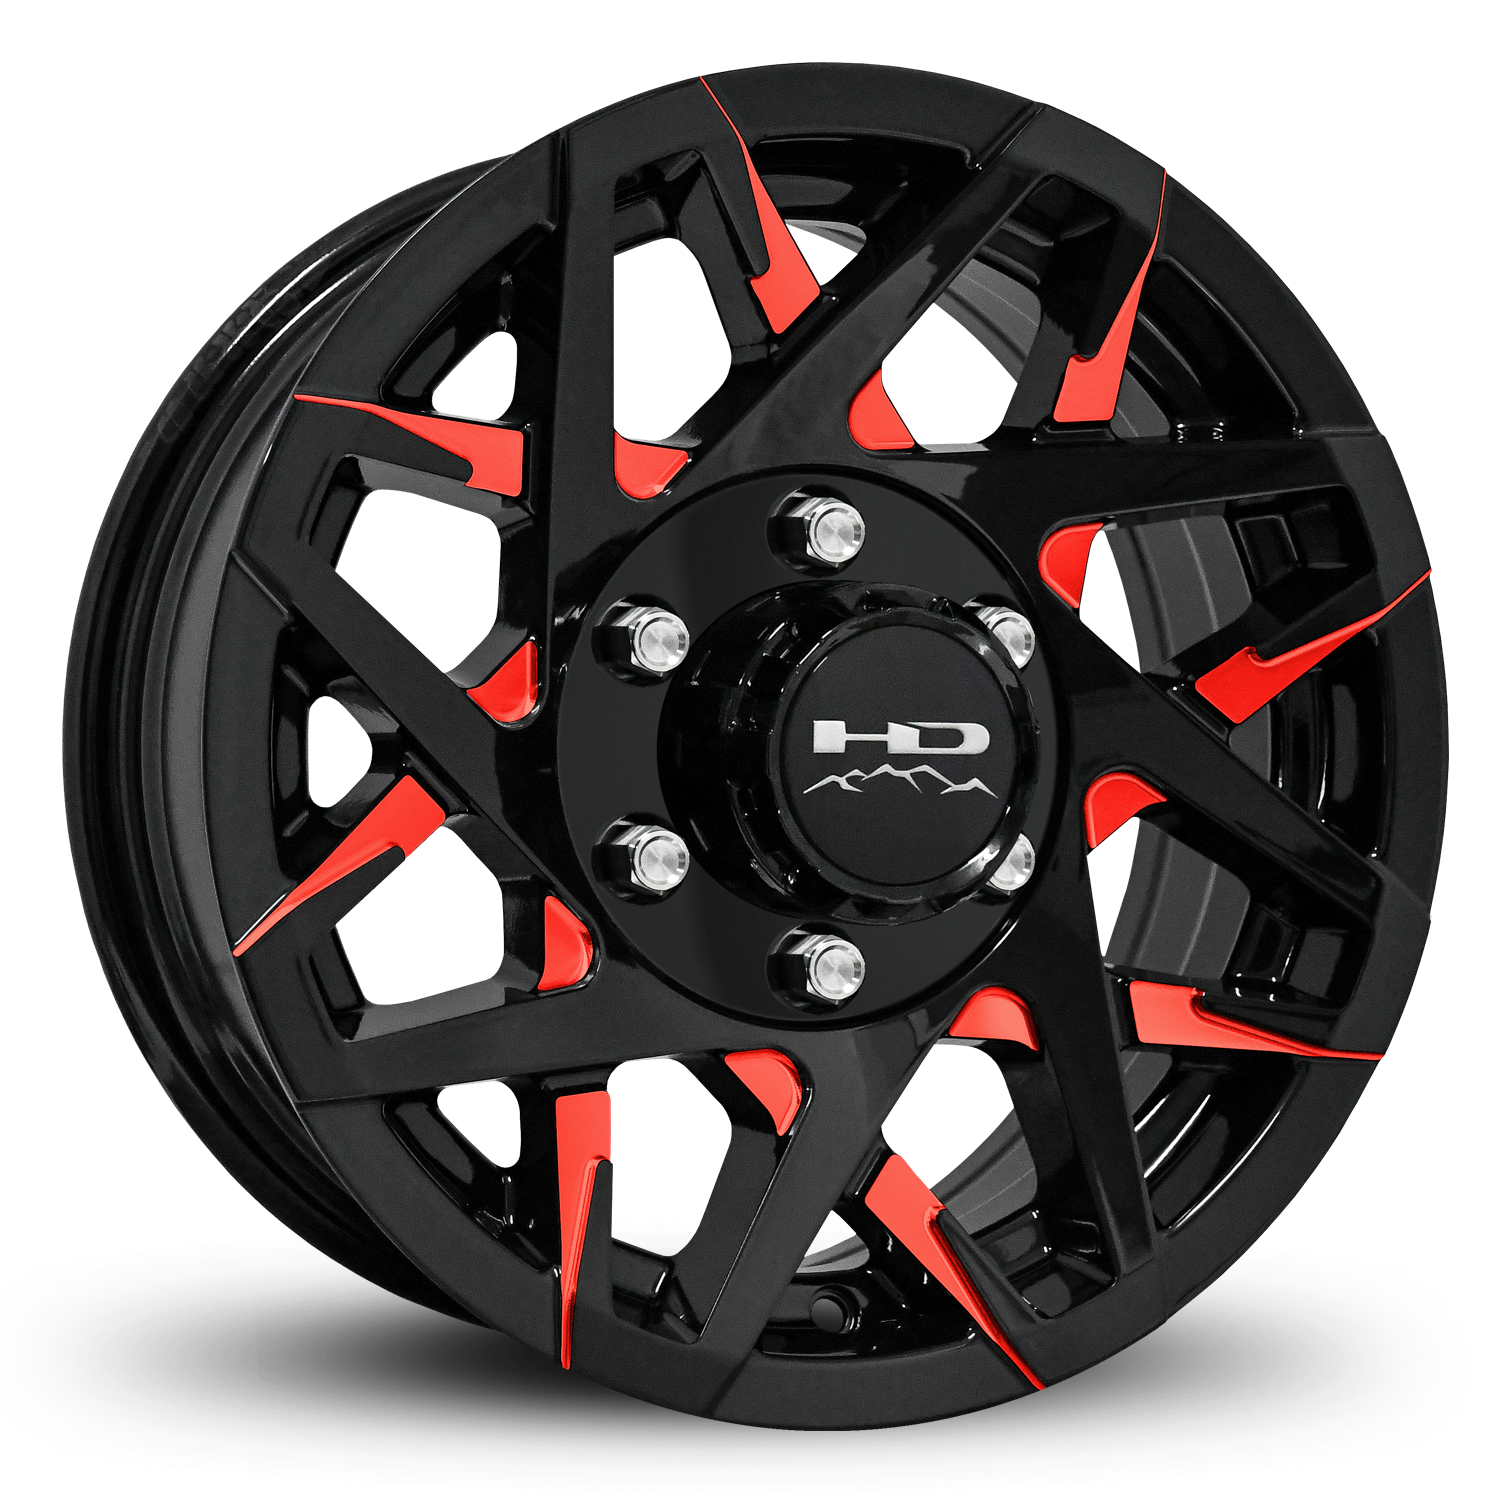 HD Off-Road Canyon Red Custom Trailer Wheel Rims in 16x6.0 16x6 Gloss Black CNC Milled Face Spokes with Center Cap & Logo fits 6x139.7 / 6x5.50 Axle Boat, Car, RV, Travel, Concession, Horse, Utility, Lawn & Garden, & Landscaping.